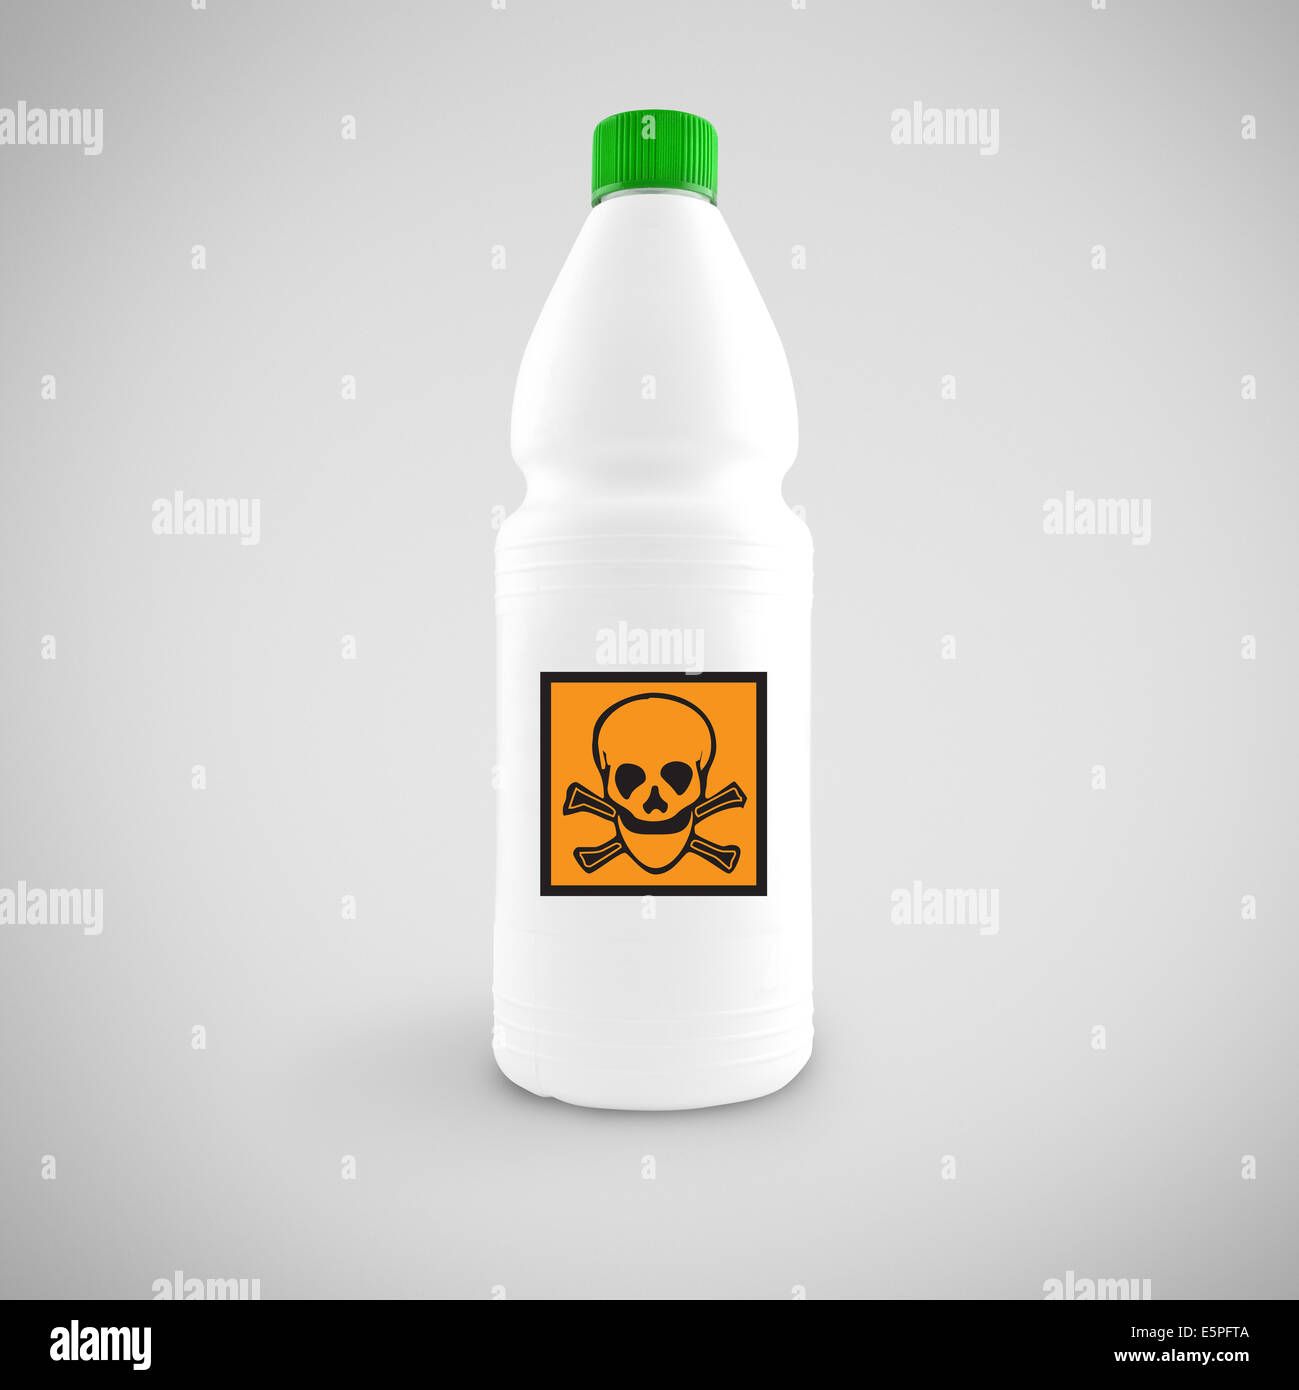 Bottle of chemical liquid with hazard symbol for toxic material Stock Photo